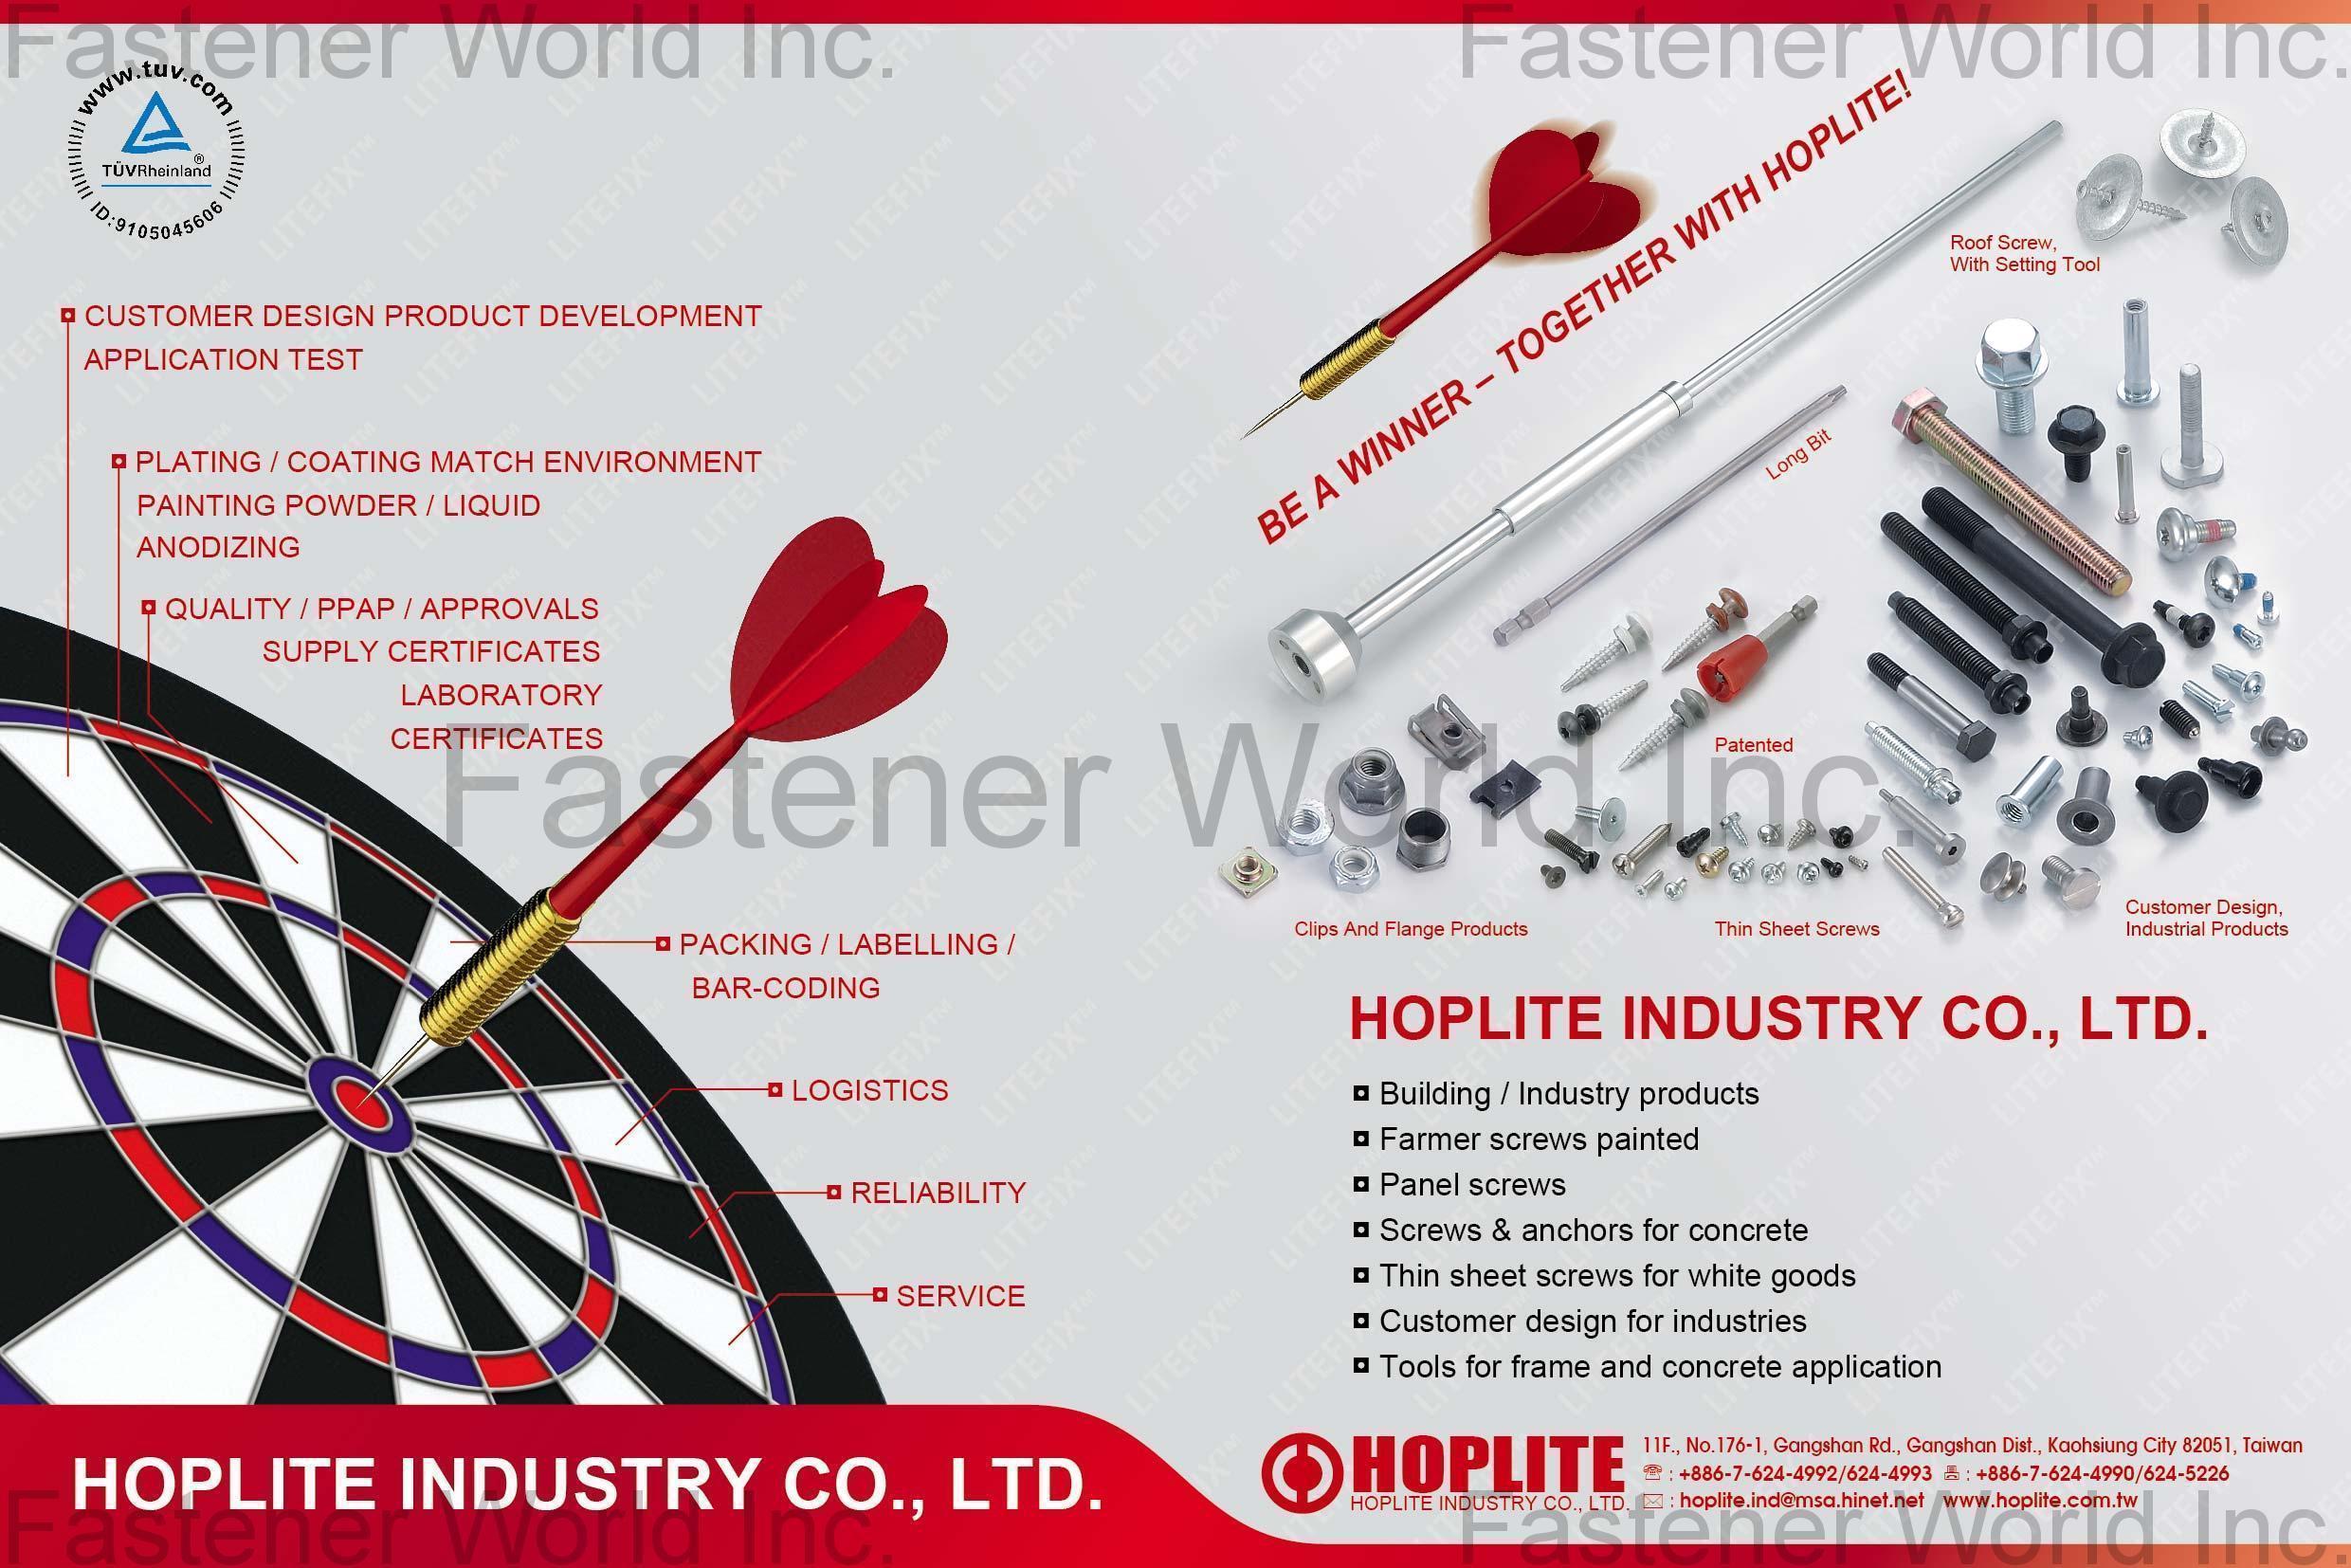 HOPLITE INDUSTRY CO., LTD , Building / Industry products, Farmer screws painted, Panel screws, Screws & anchors for concrete, Thin sheet screws for white goods, Customer design for industries, Tools for frame and concrete application , Customized Special Screws / Bolts